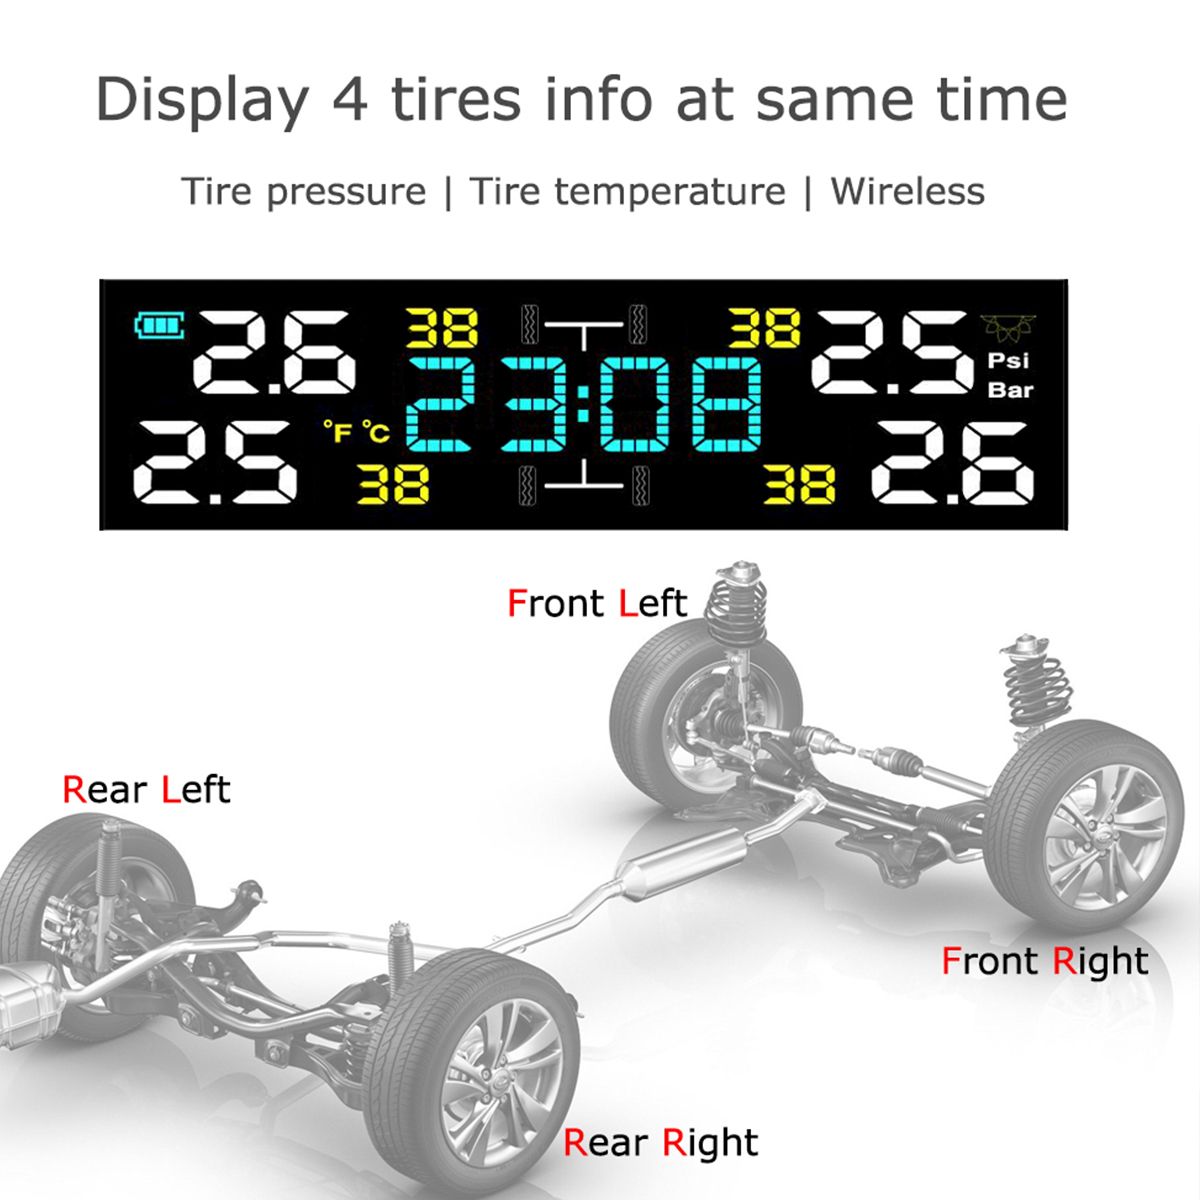 Car-TPMS-Tyre-Pressure-Monitor-System-Solar-Power-LCD-Display-Clock-Time-Display-1764707